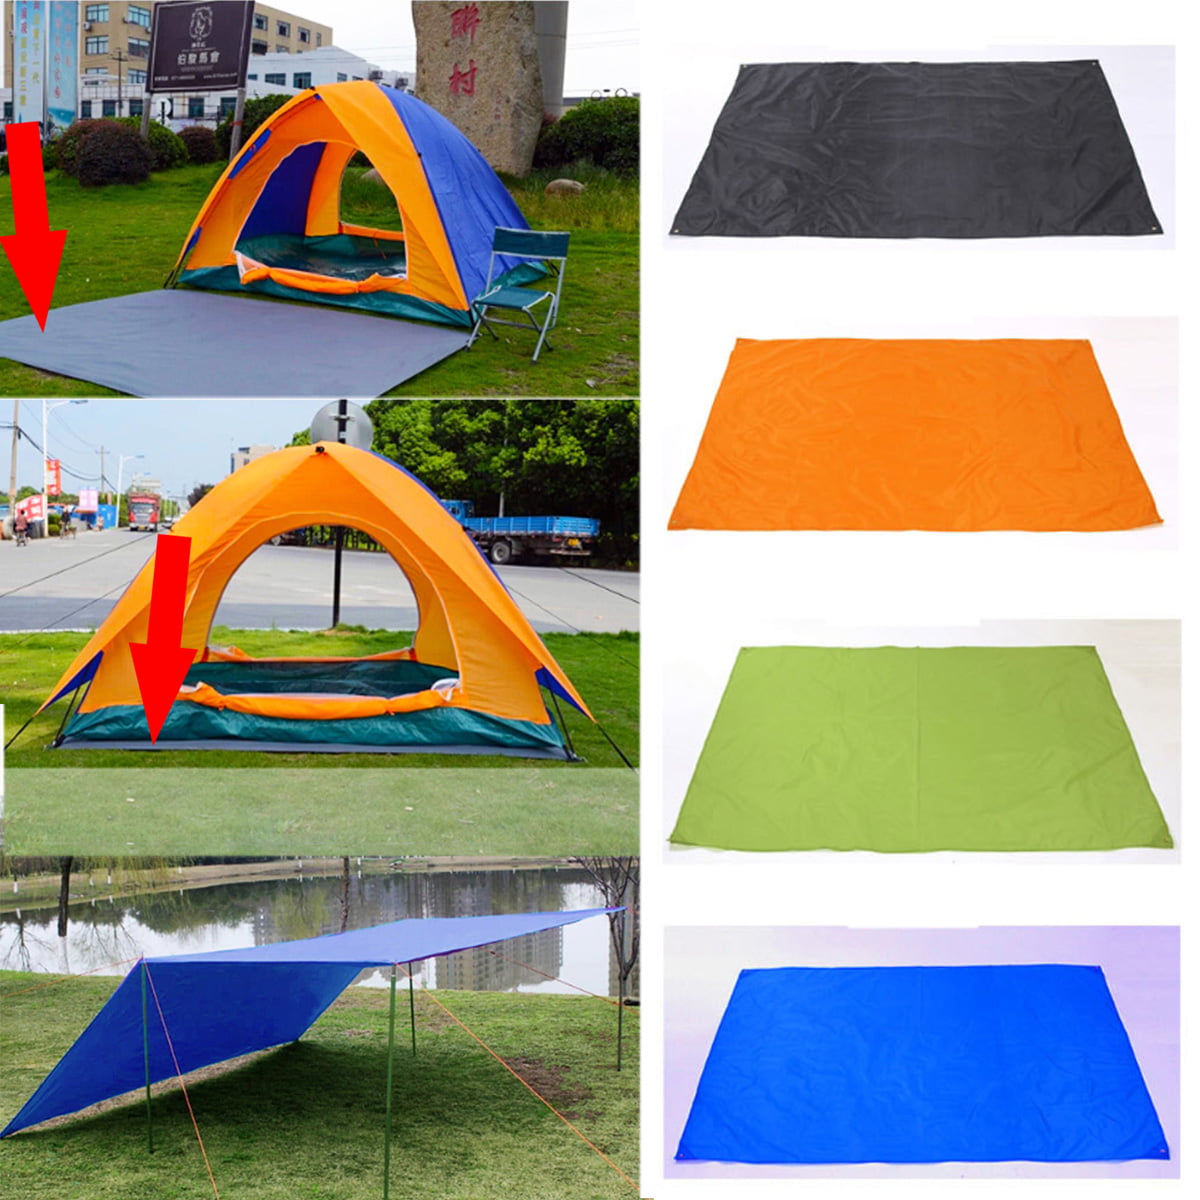 Waterproof Rip Resistant Camping Tarp for Any Weather Use for Shelter Or Sunshade Perfect Tent Cover Or Hammock Rain Fly Great for Hiking Backpacking & Travel